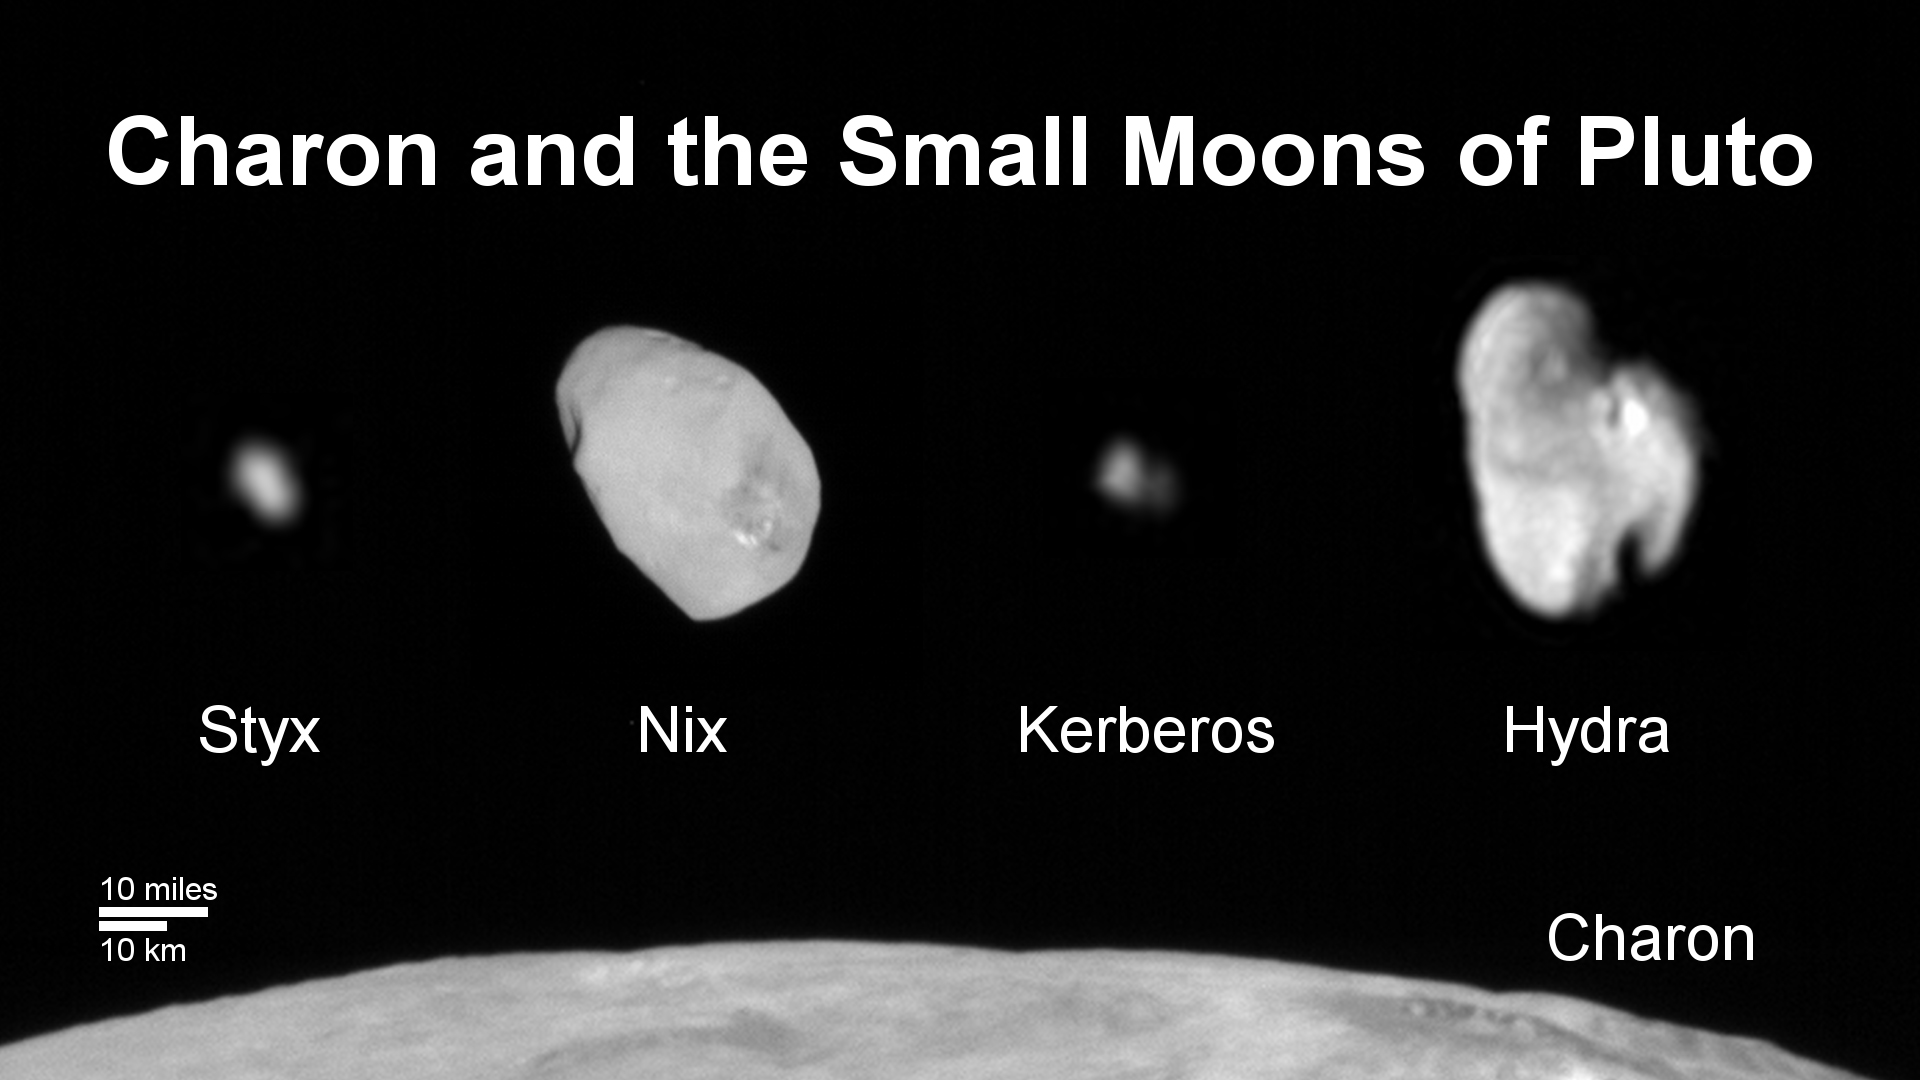 Figure 19: The small moons of Pluto, shown to scale with Charon. Credit: NASA/JHUAPL/SwRI